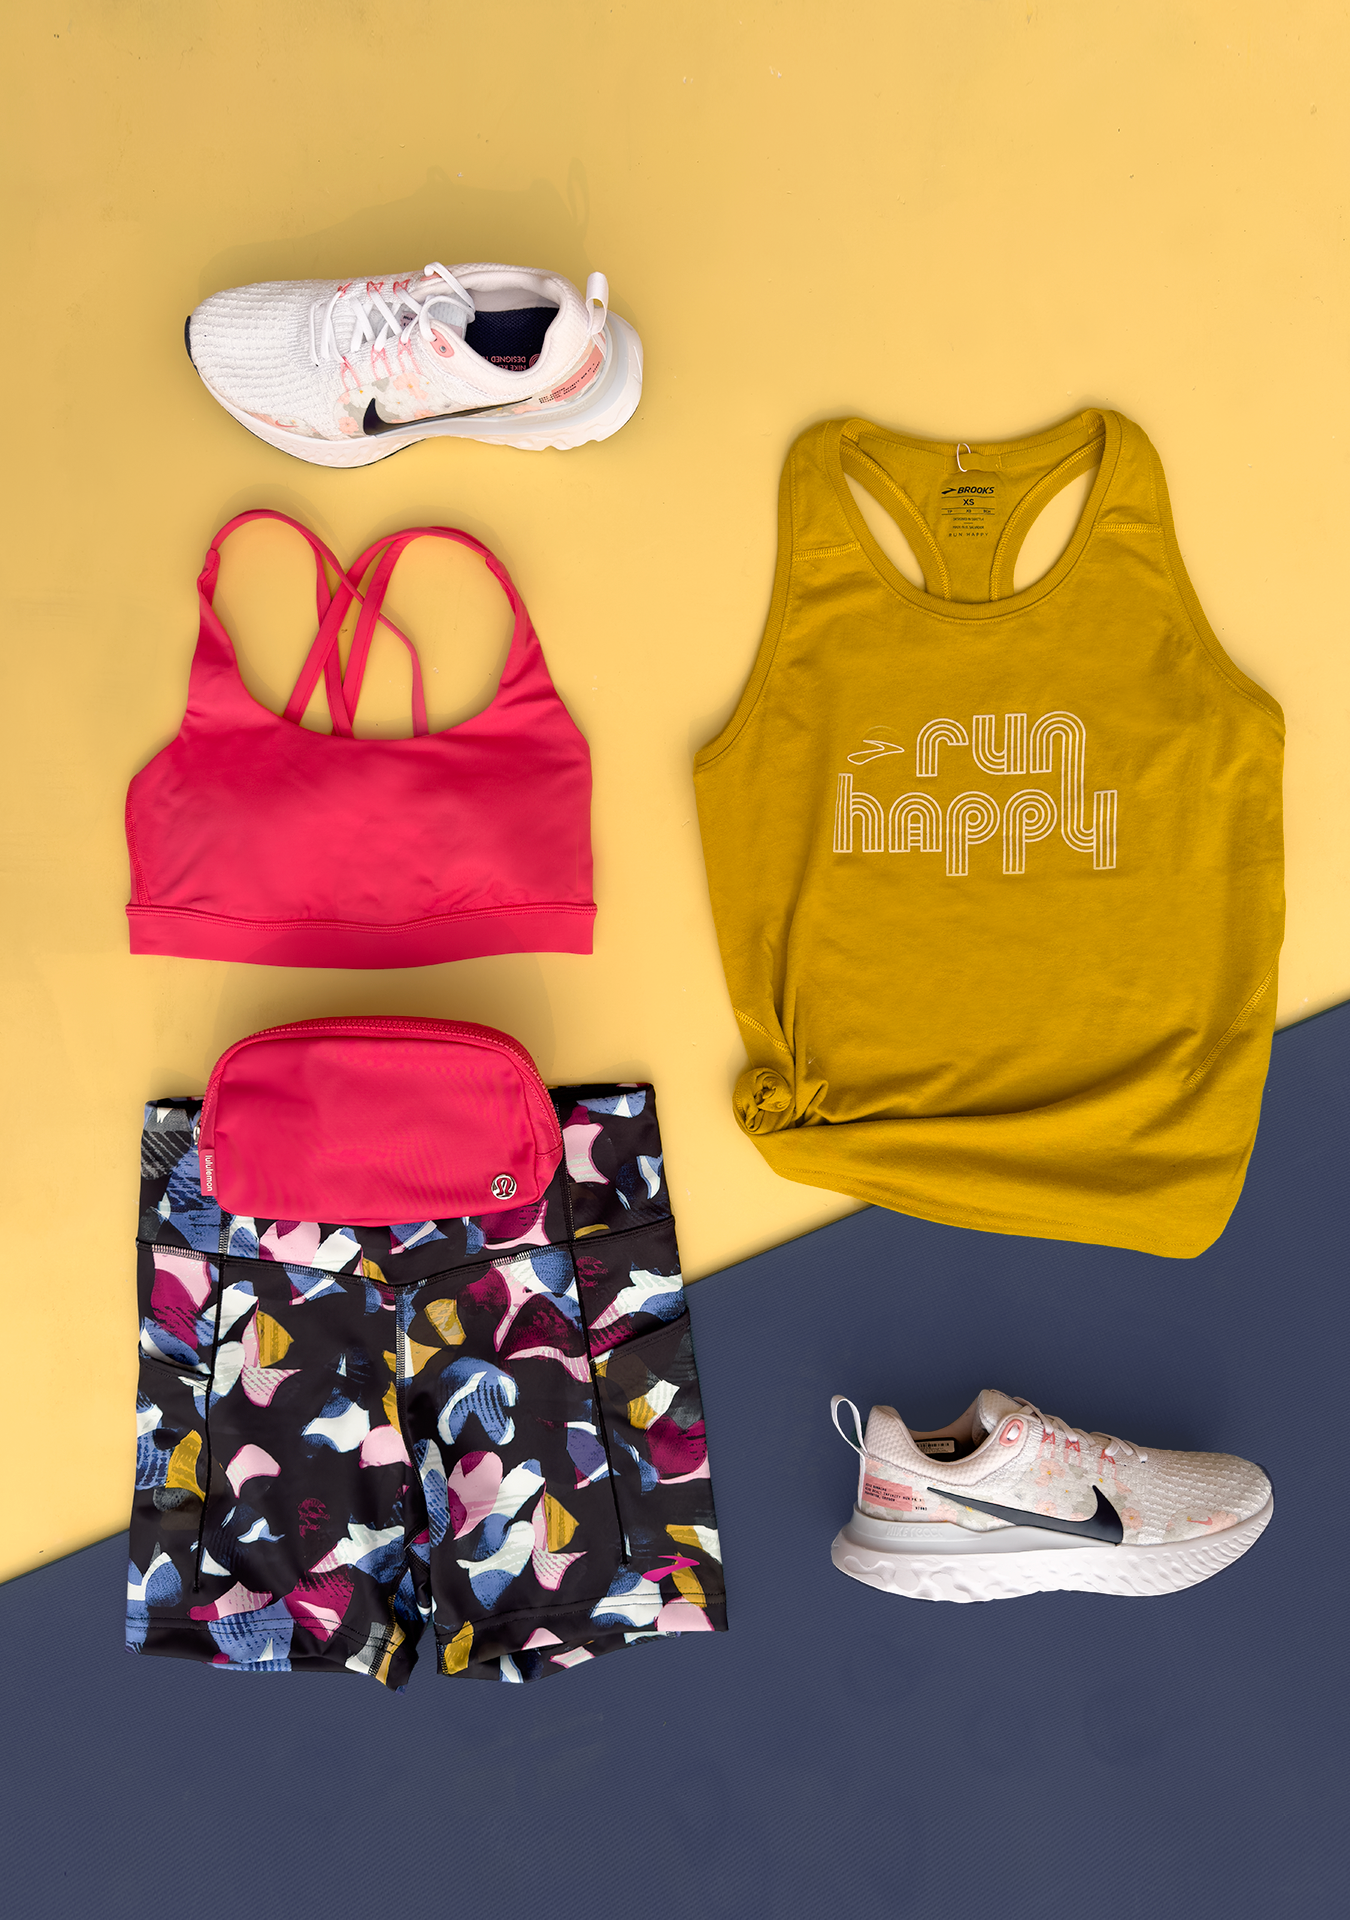 picture of womens apparel and nike shoes. click to shop women's apparel.